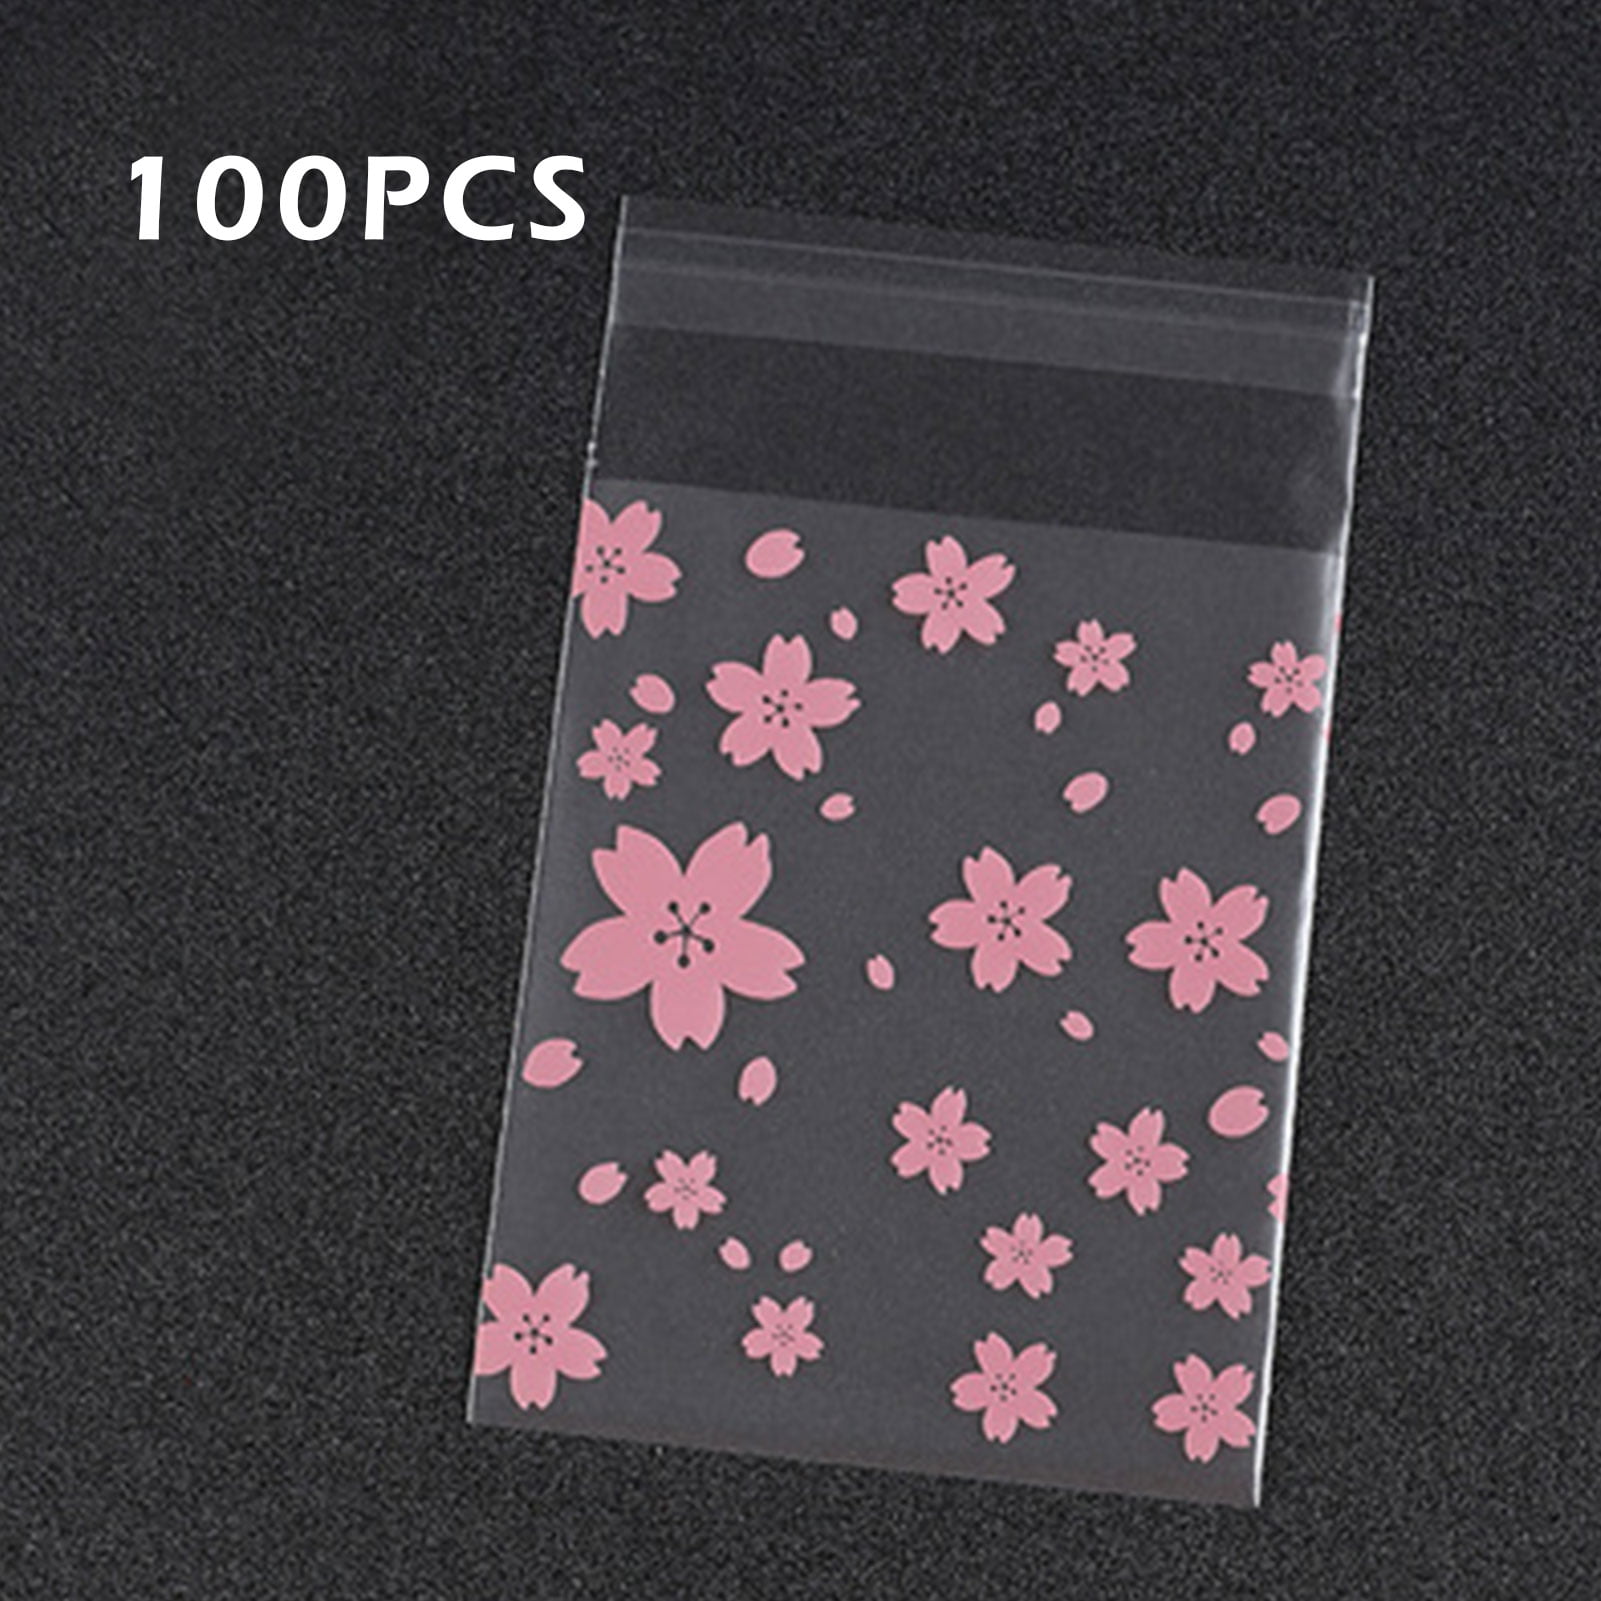 Plastic Resealable Biscuit Bags Pink Rose Pattern Self-Adhesive About 100pcs 